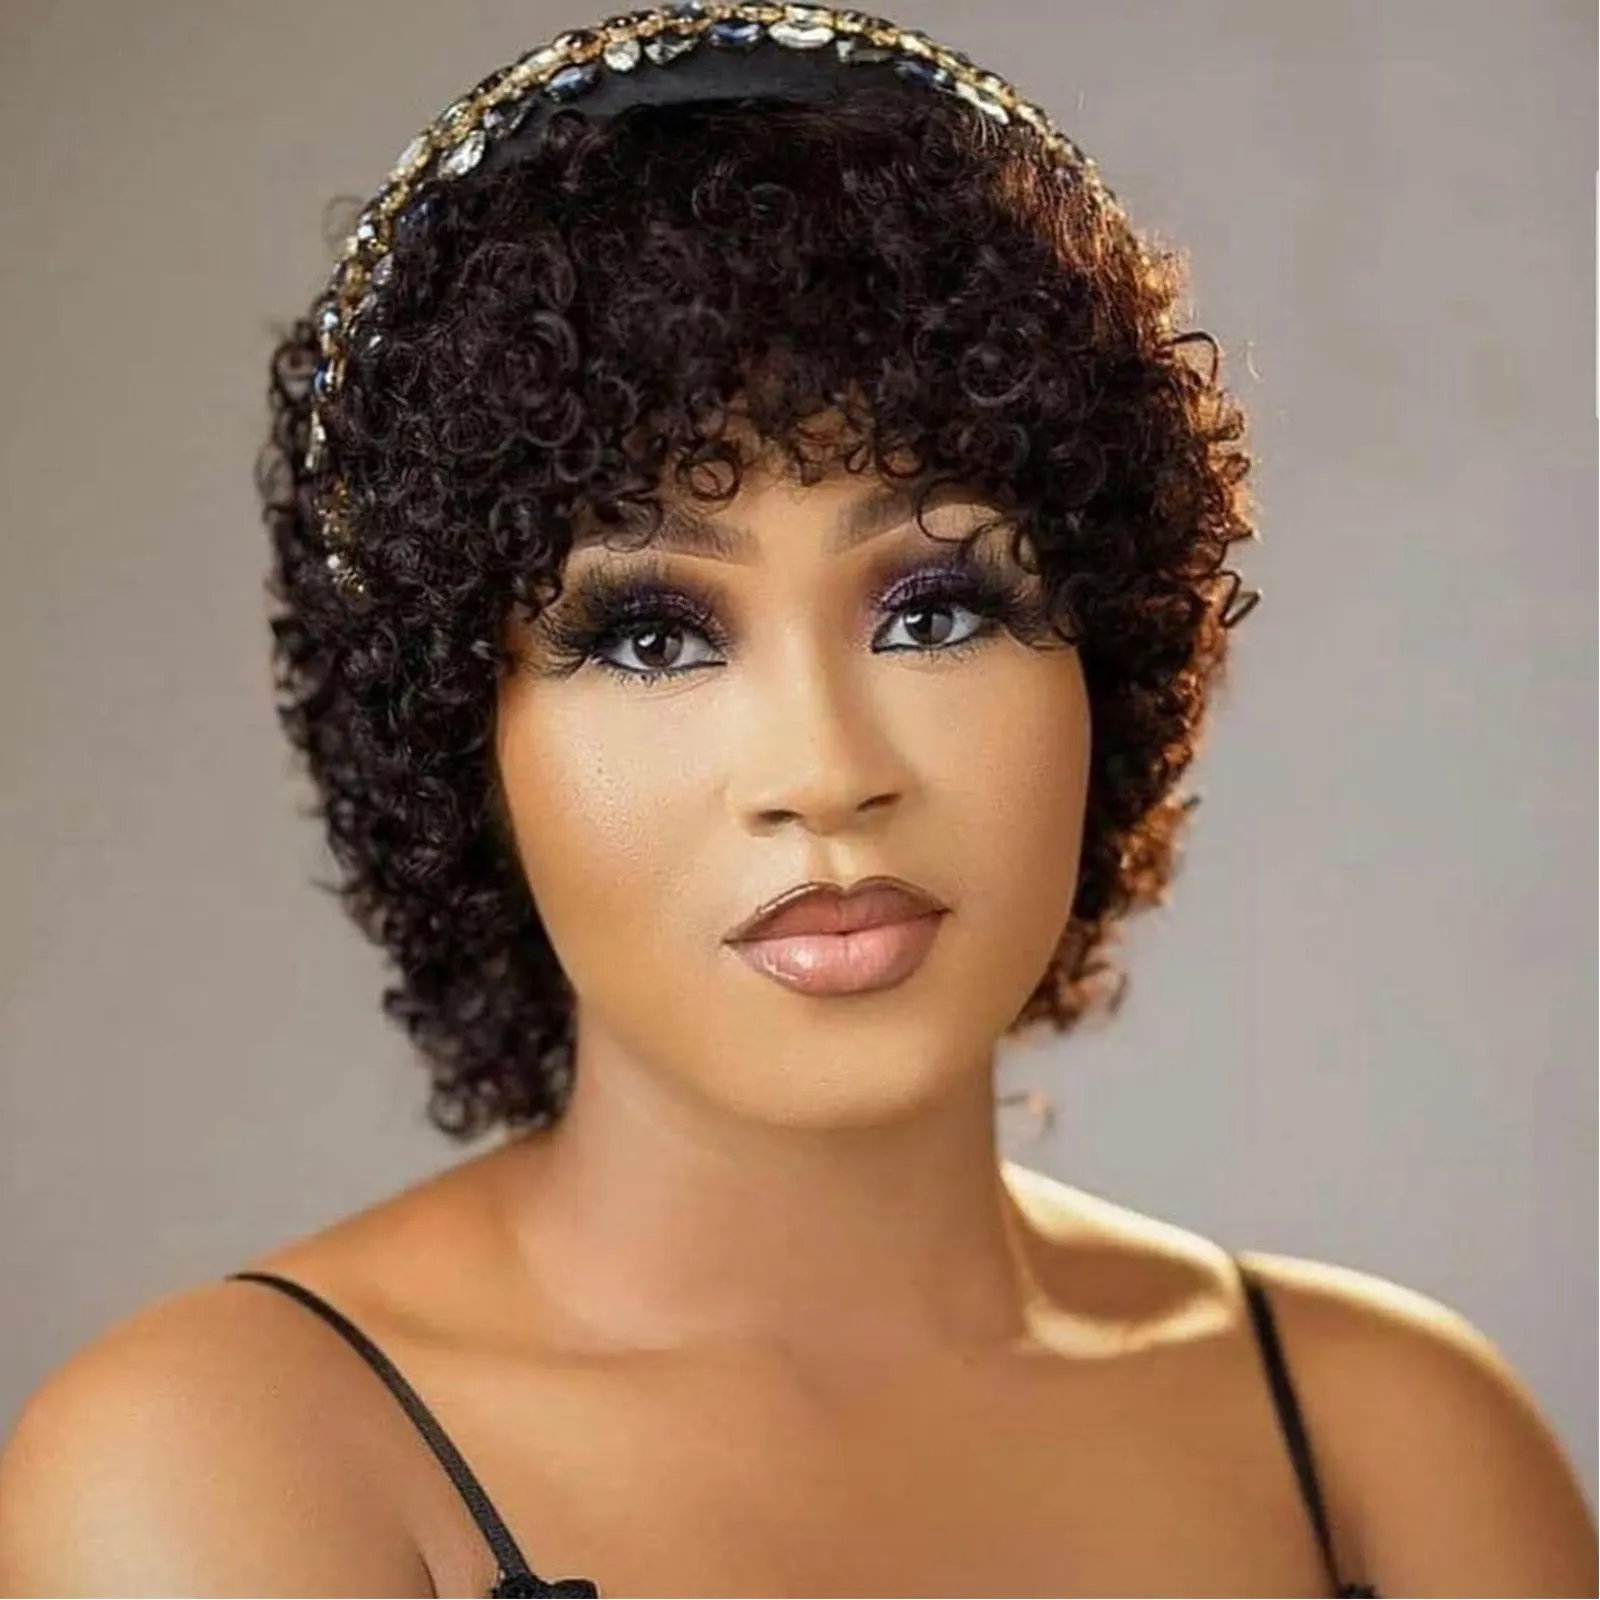 G&T Human Hair Short Curly Wigs for Black Women Brazilian Virgin Afro Wigs with Bangs Fluffy Natural Daily Wig